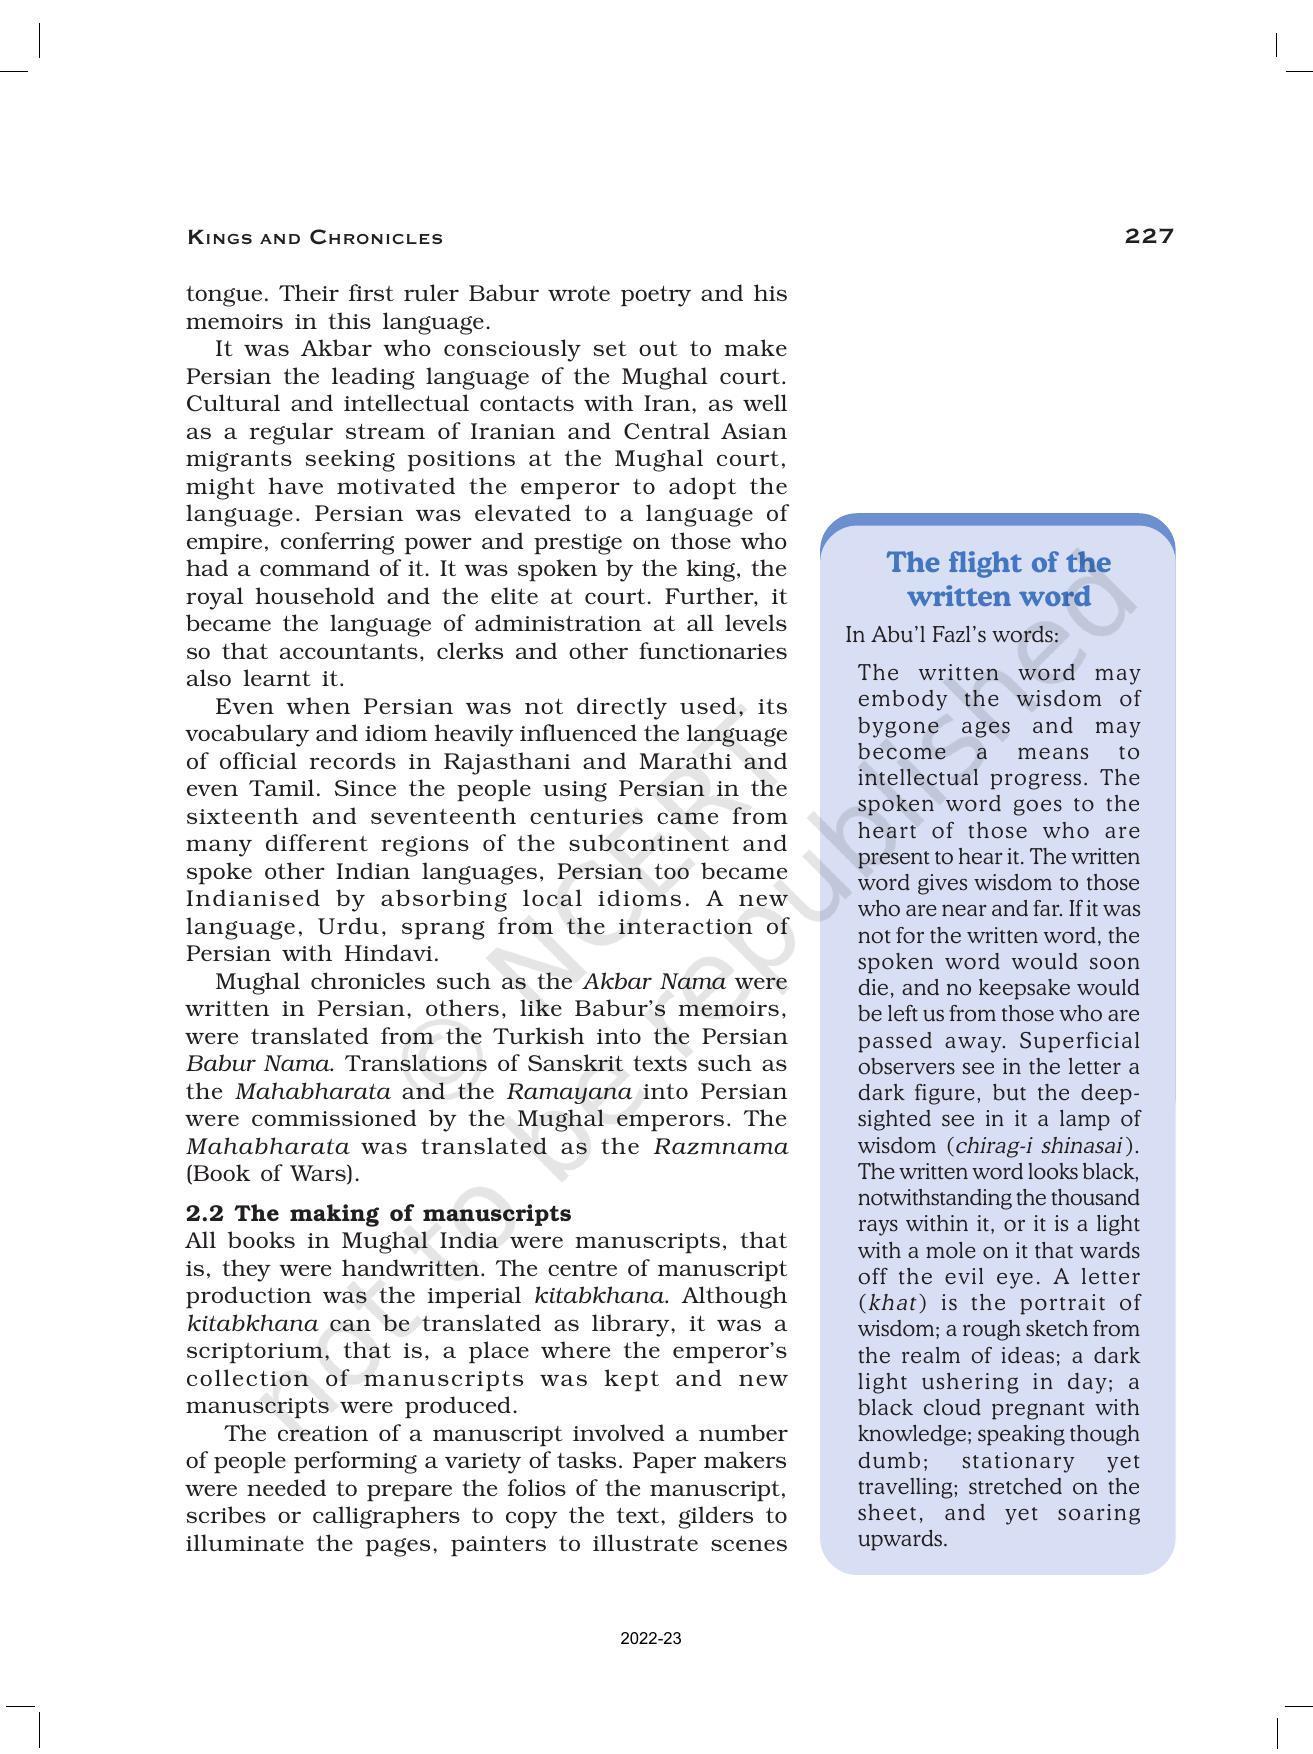 NCERT Book for Class 12 History (Part-II) Chapter 9 Kings and Chronicles - Page 4